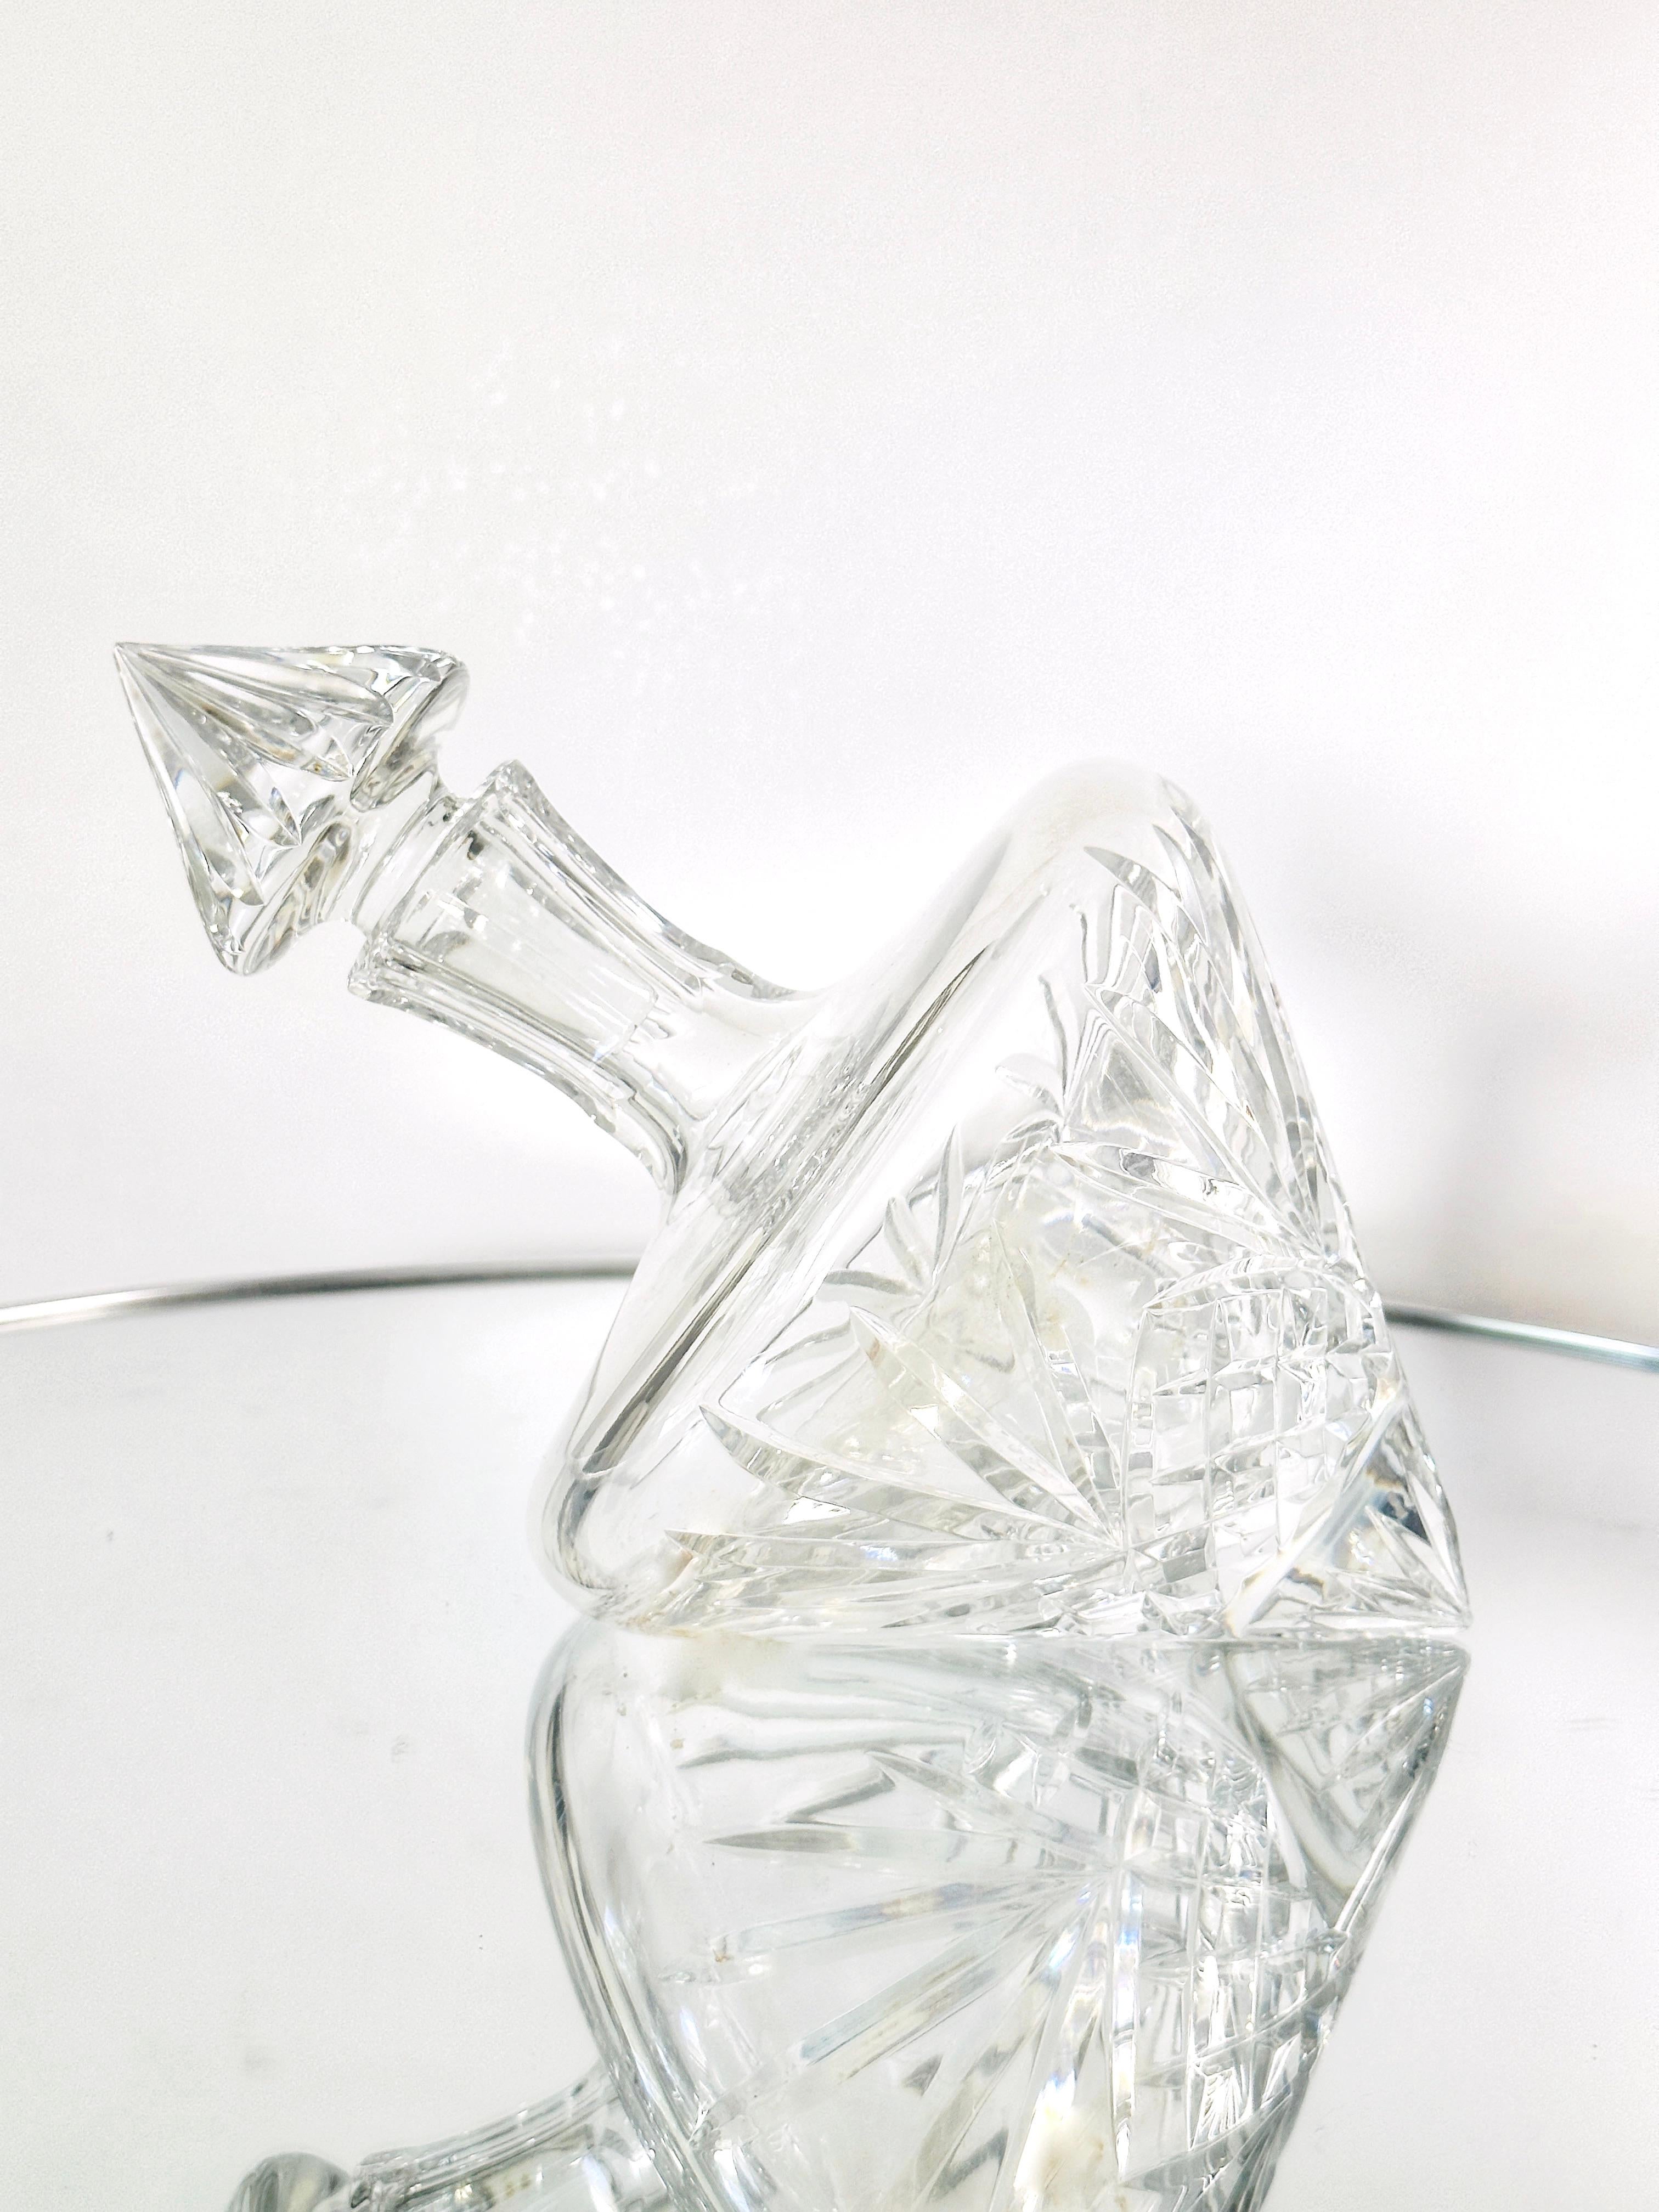 Vintage Waterford Crystal Leaning Decanter with Etched Designs, circa 1980 3